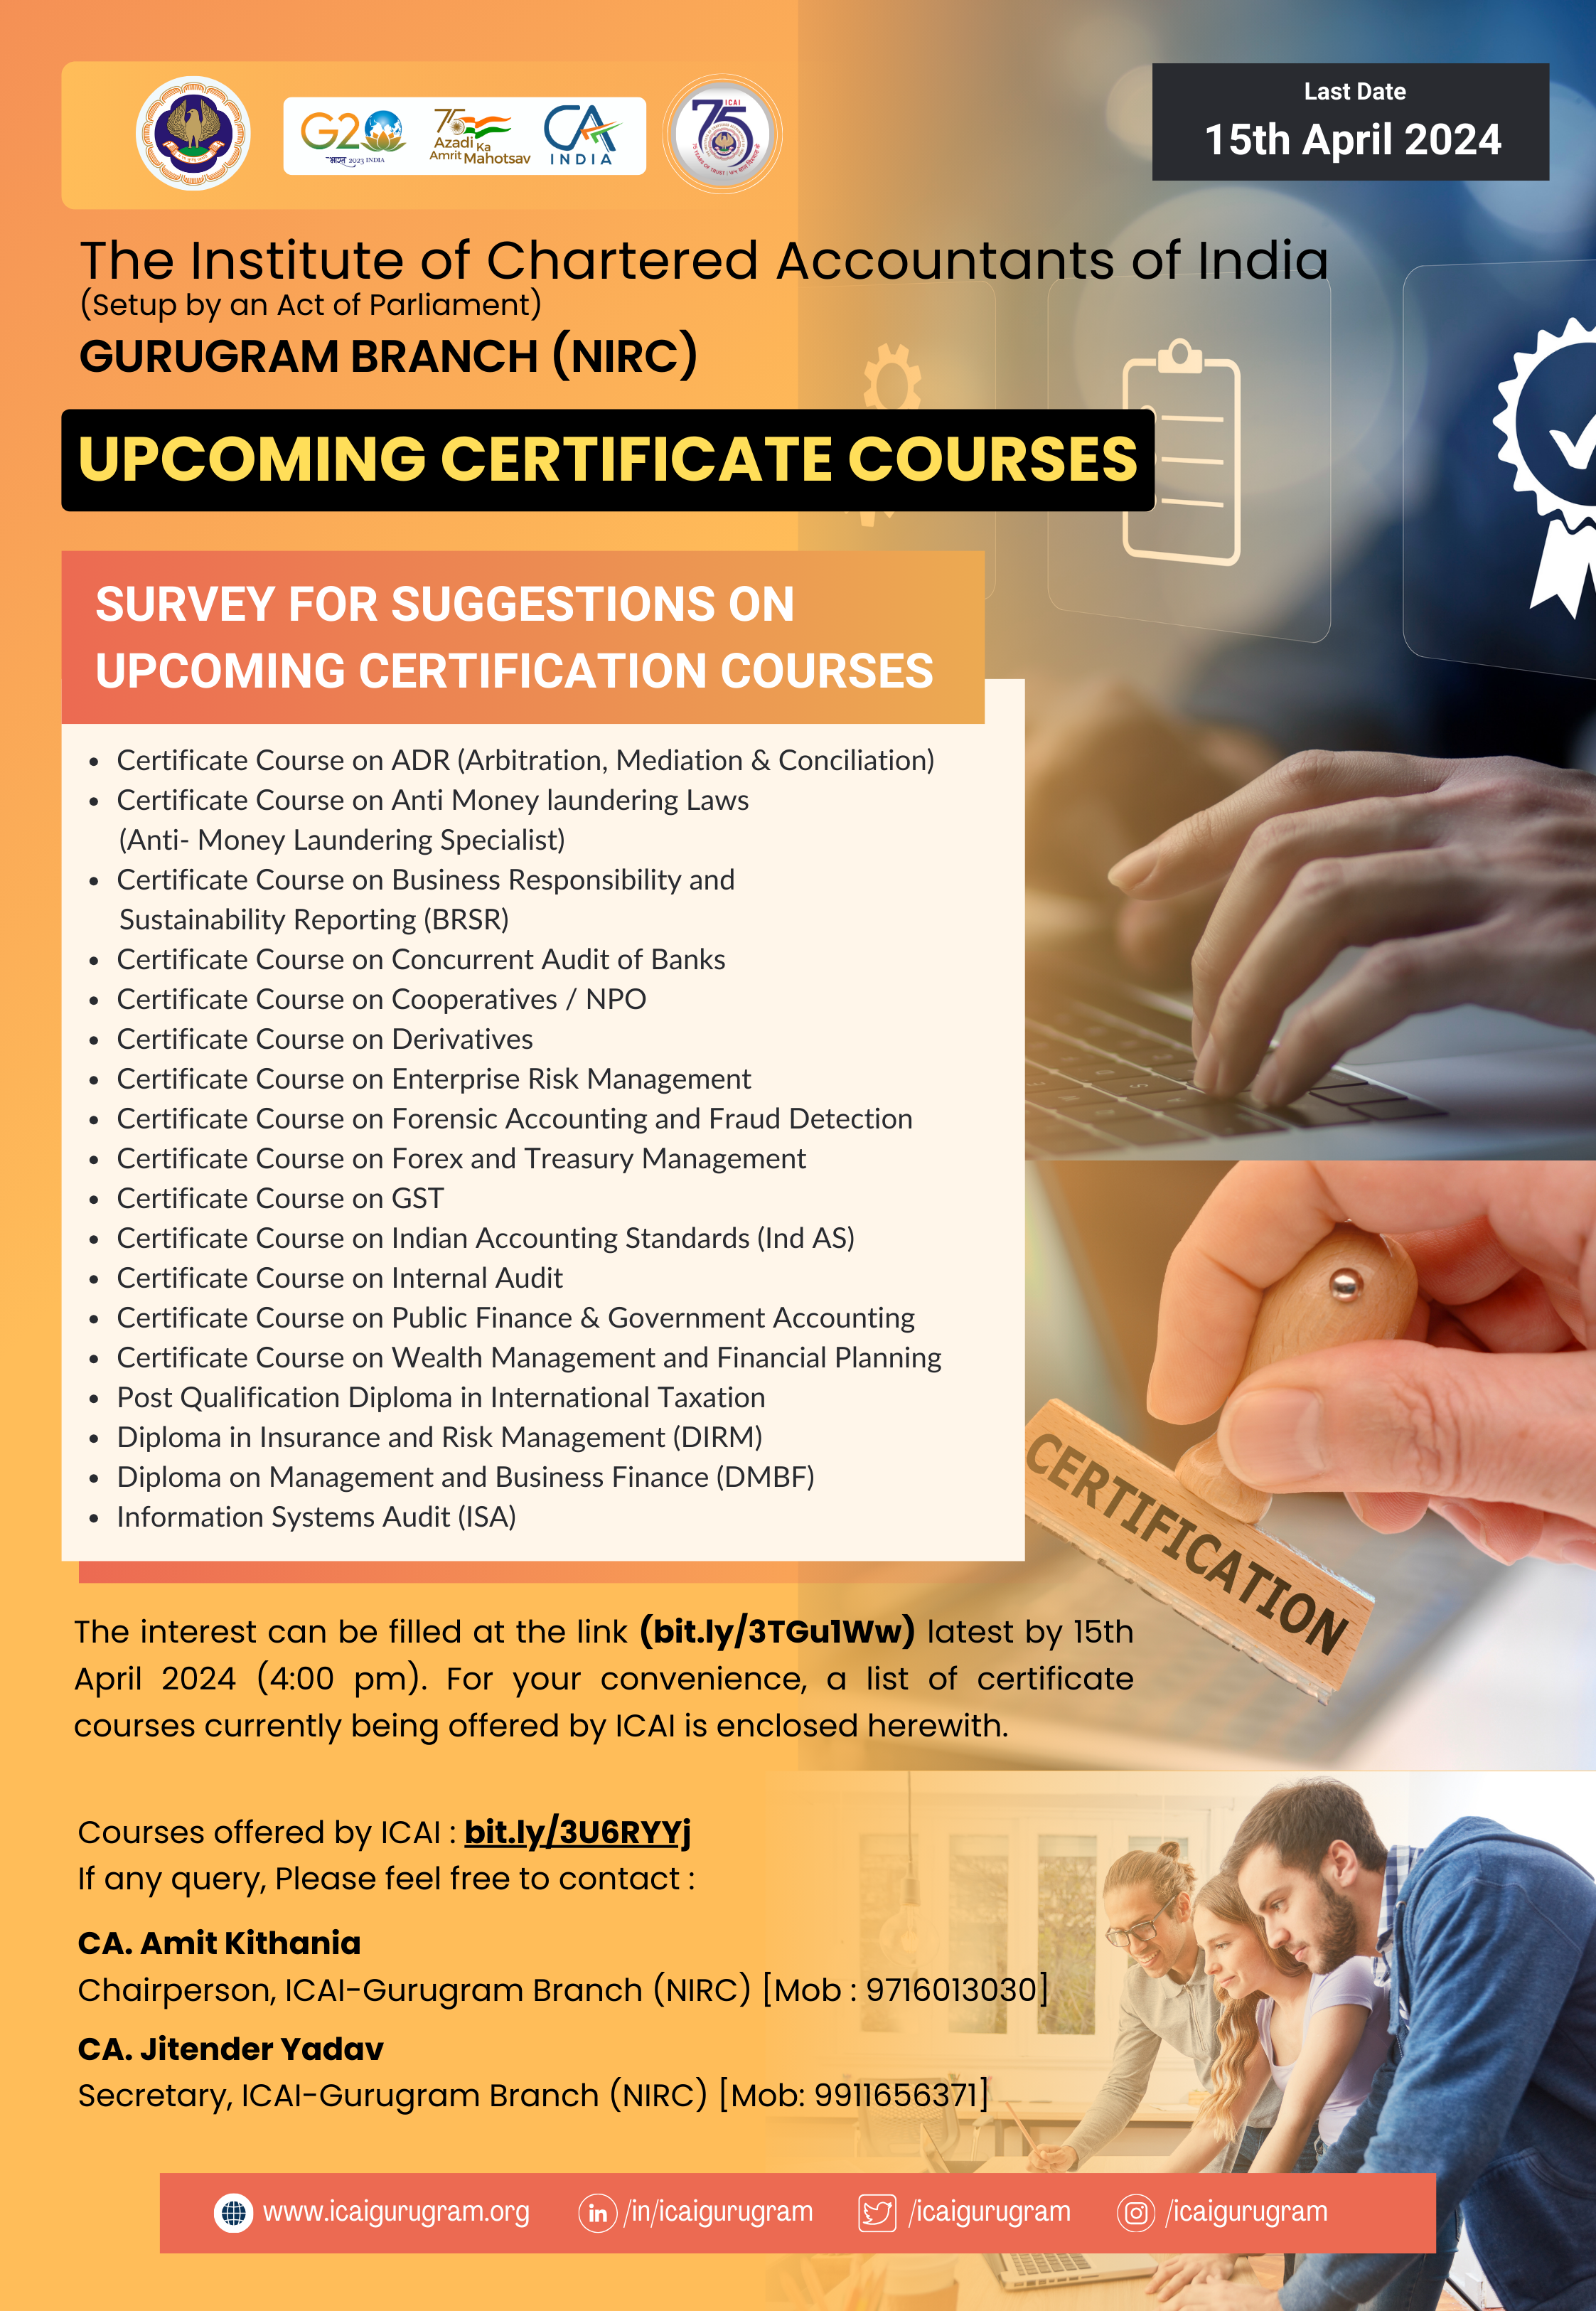 Certification Courses conducted by ICAI